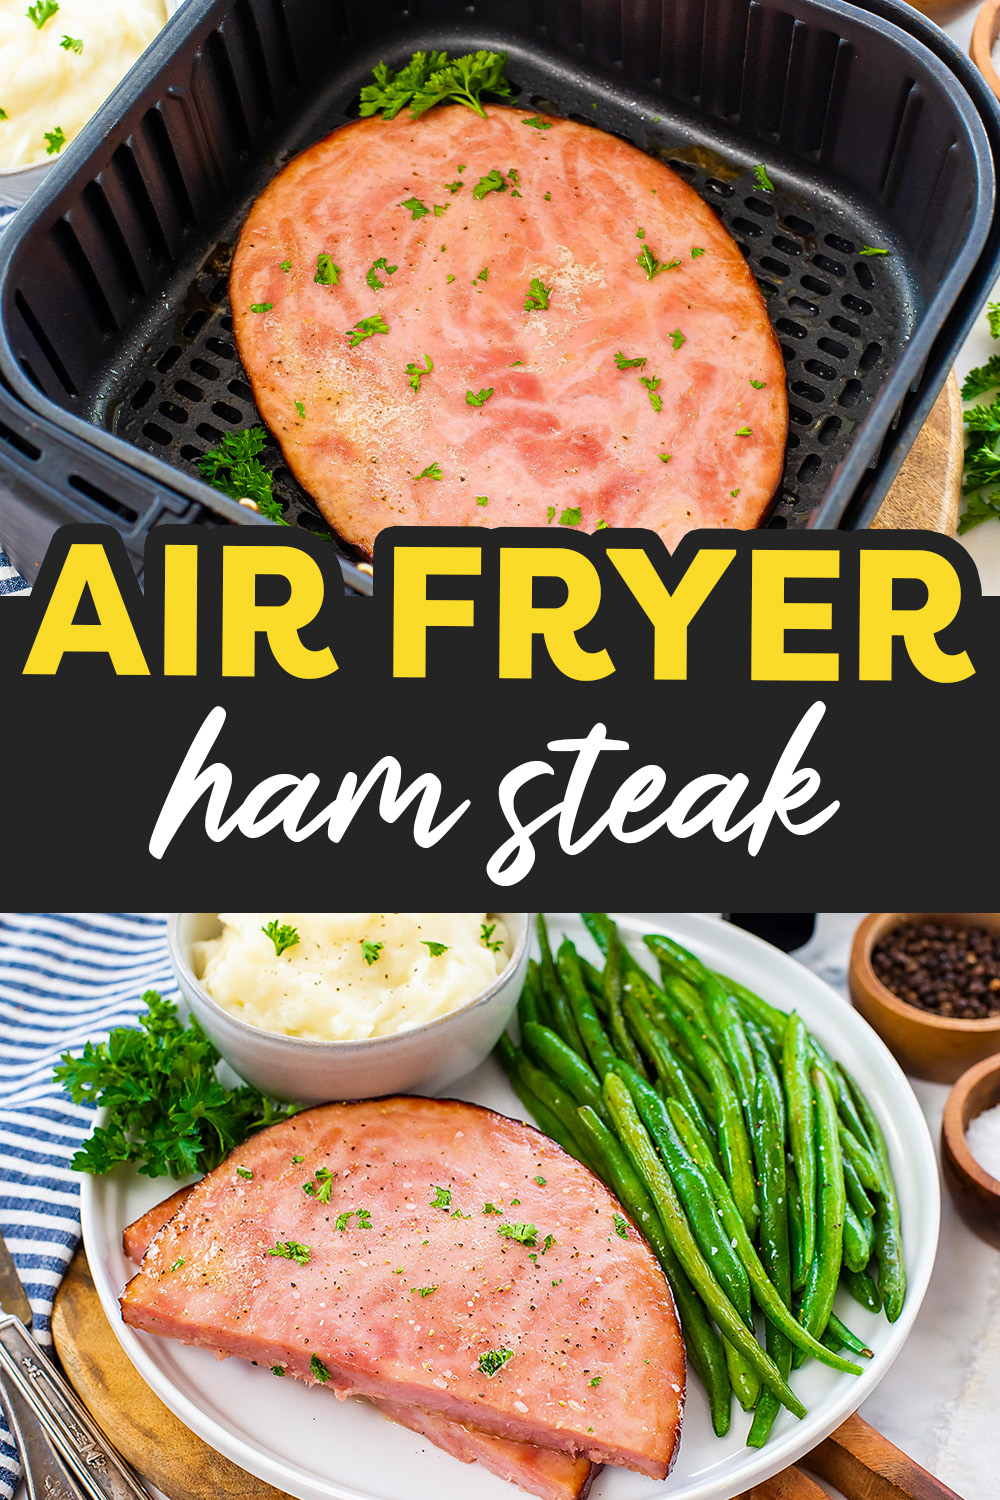 These ham steaks are magnificently seasoned and easy to make in the air fryer!  Great for dinner or any work week lunch!